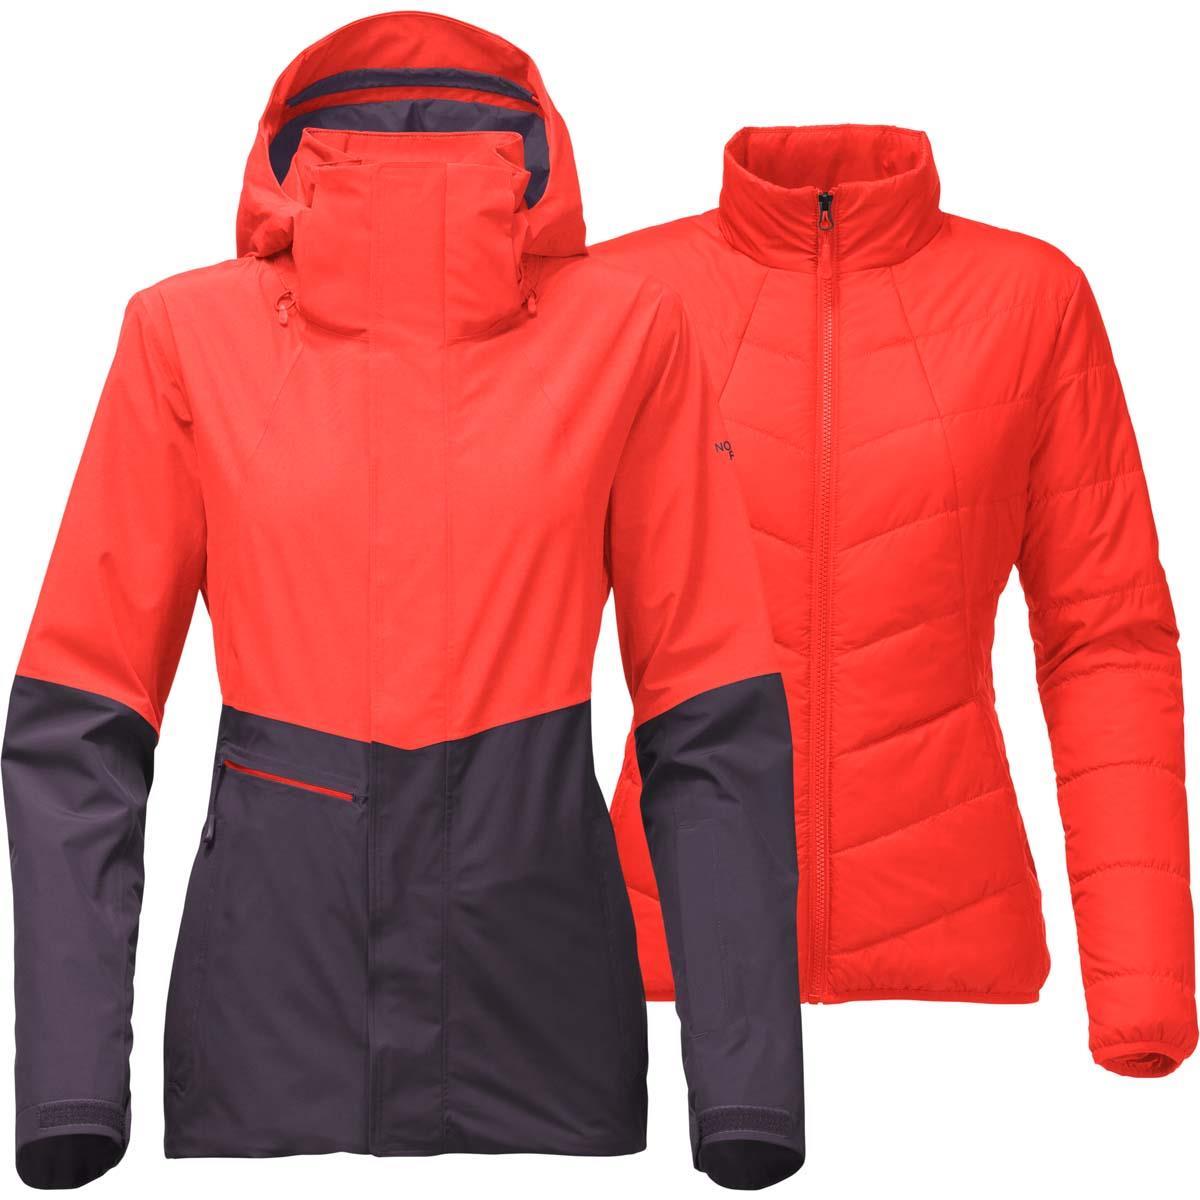 the north face women's snowboard jacket